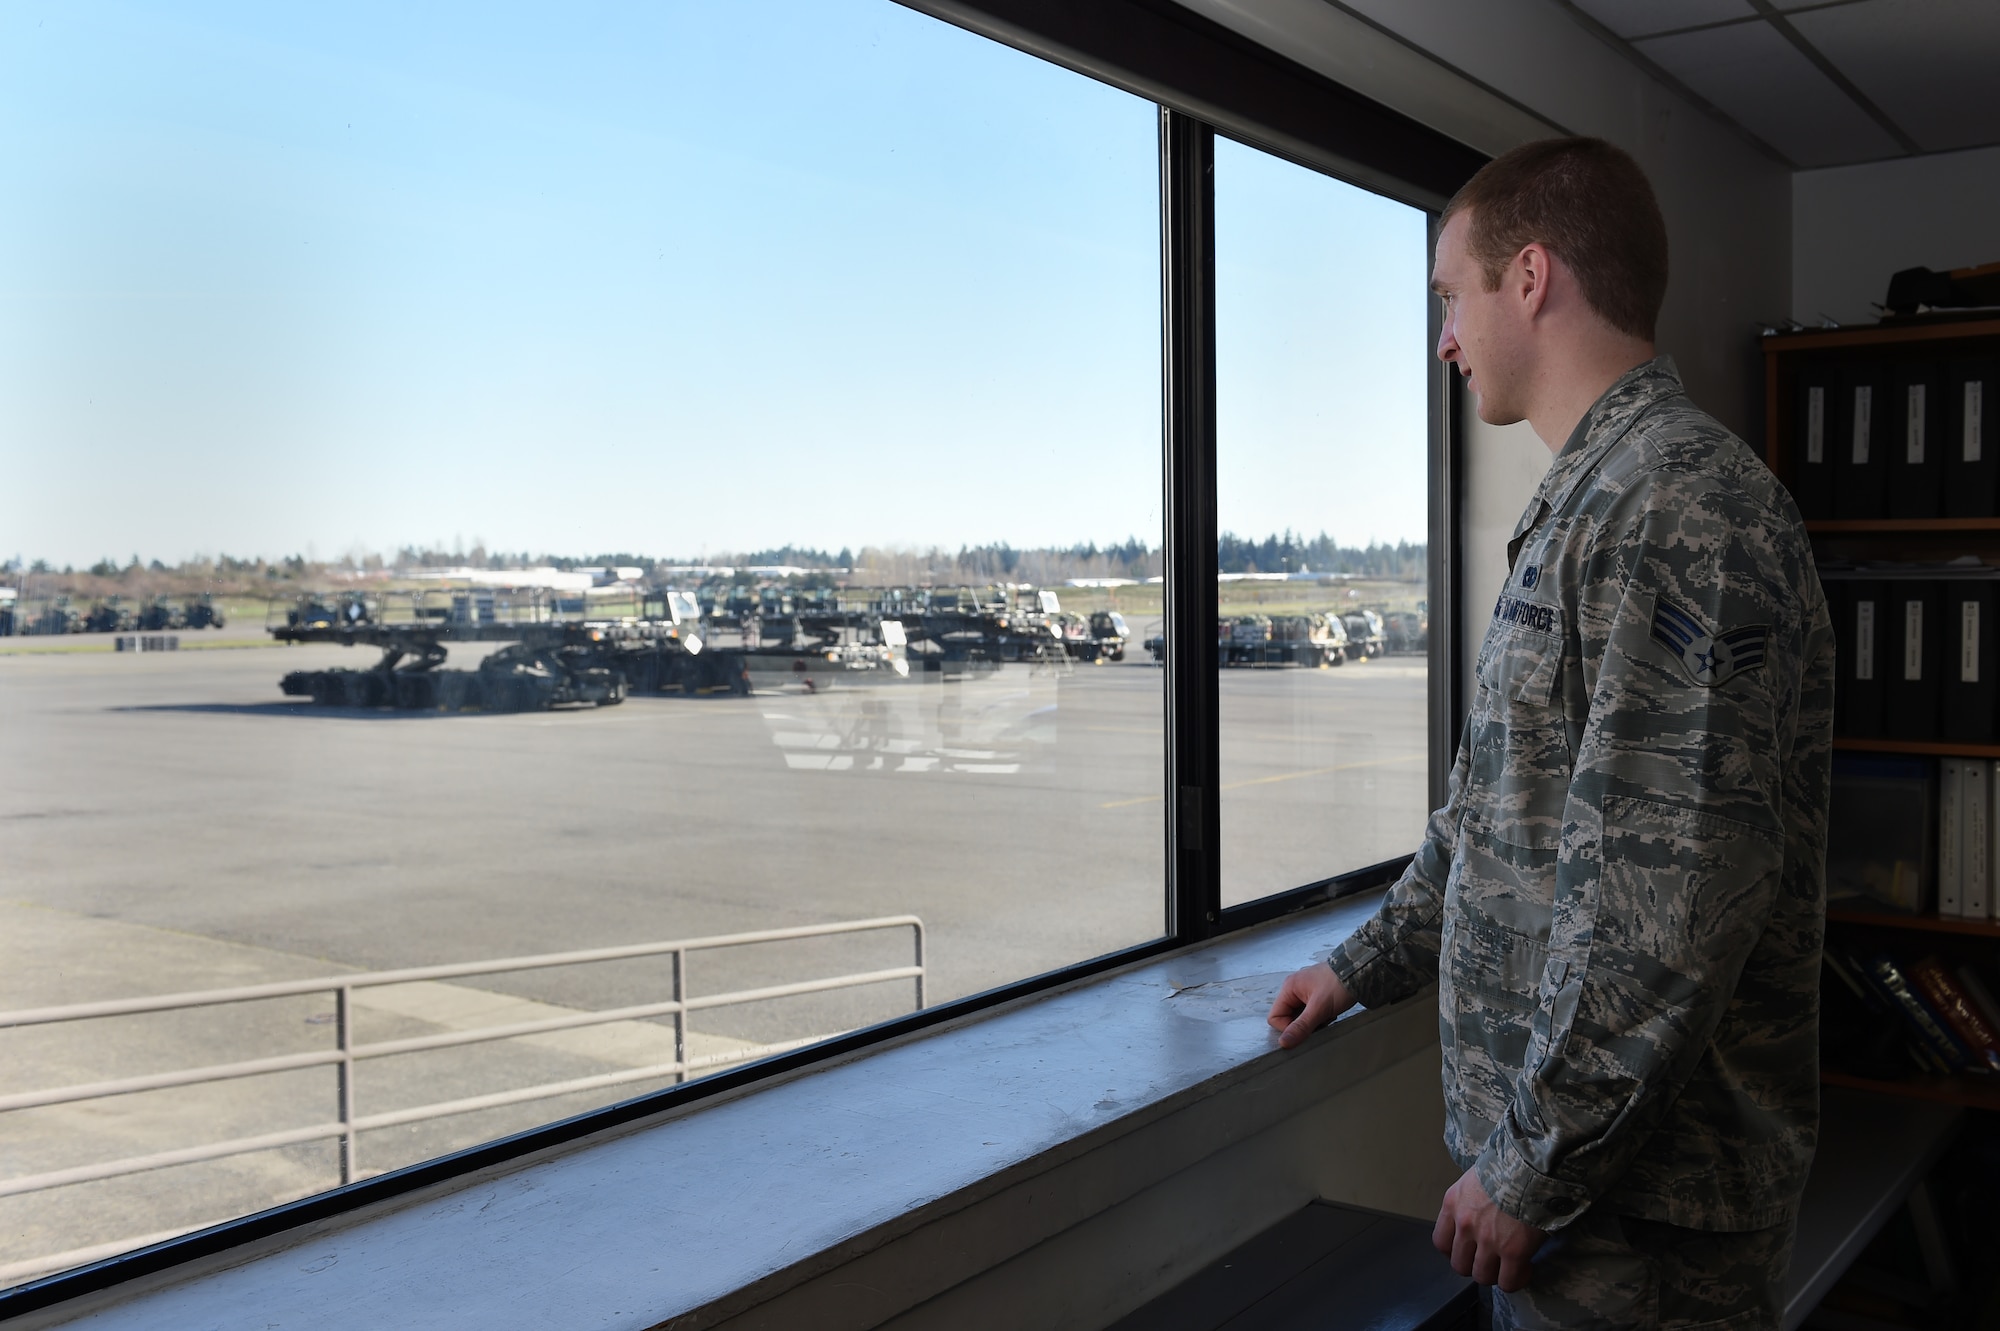 Senior Airman Brandon Cargill, 62nd Aerial Port Squadron ramp services journeyman, looks out of his office window in the ramp services section of the 62nd APS March 17, 2016, at Joint Base Lewis-McChord, Wash. The ramp services section of the APS provides eyes on the aircraft flying to and from McChord Field by ensuring whatever is on the plane is safe to fly and meets requirements. (U.S. Air Force photo/Staff Sgt. Naomi Shipley)